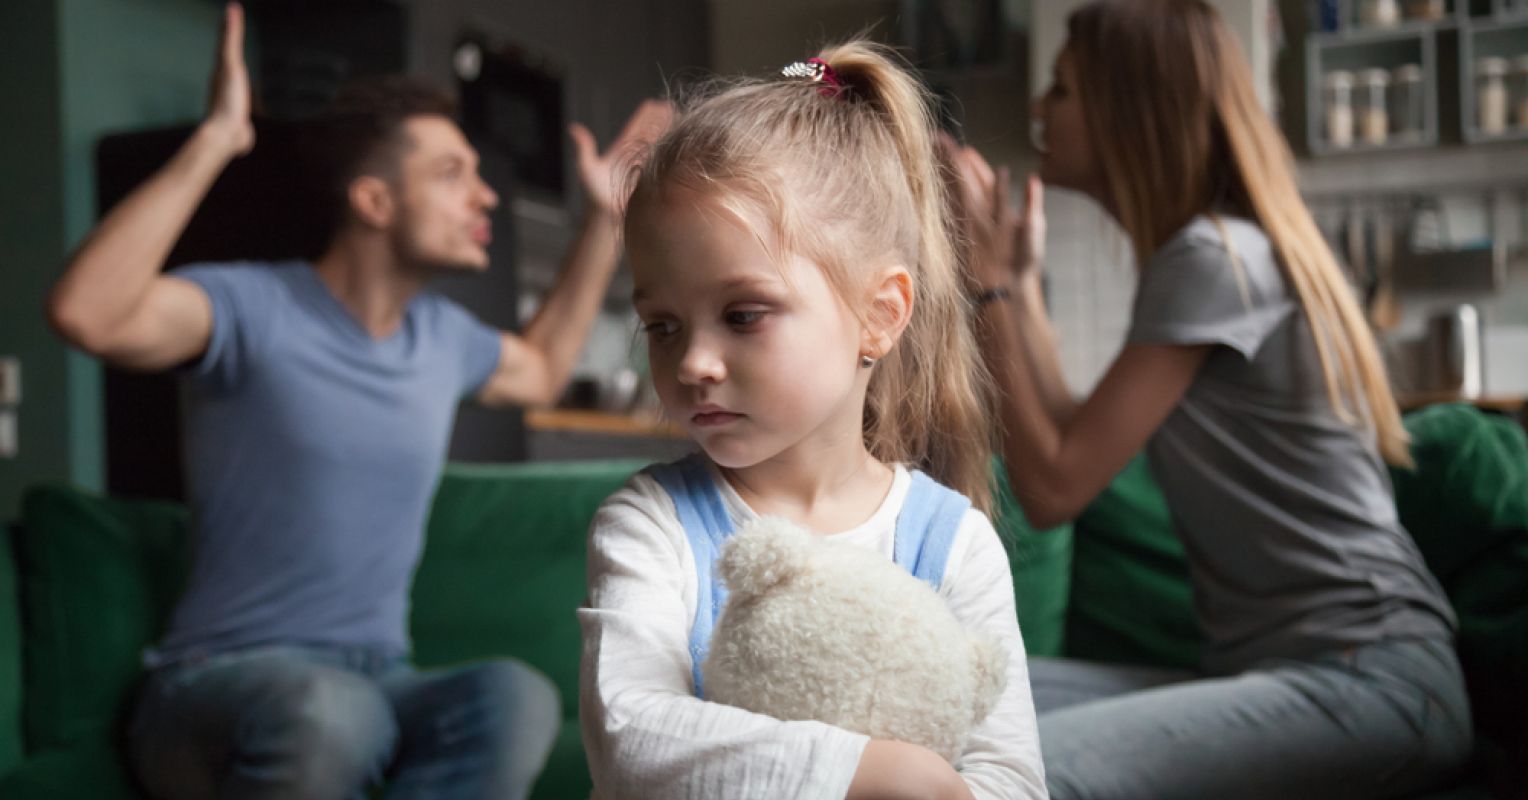 How Parents Fighting Could Affect a Kid's Mental Health